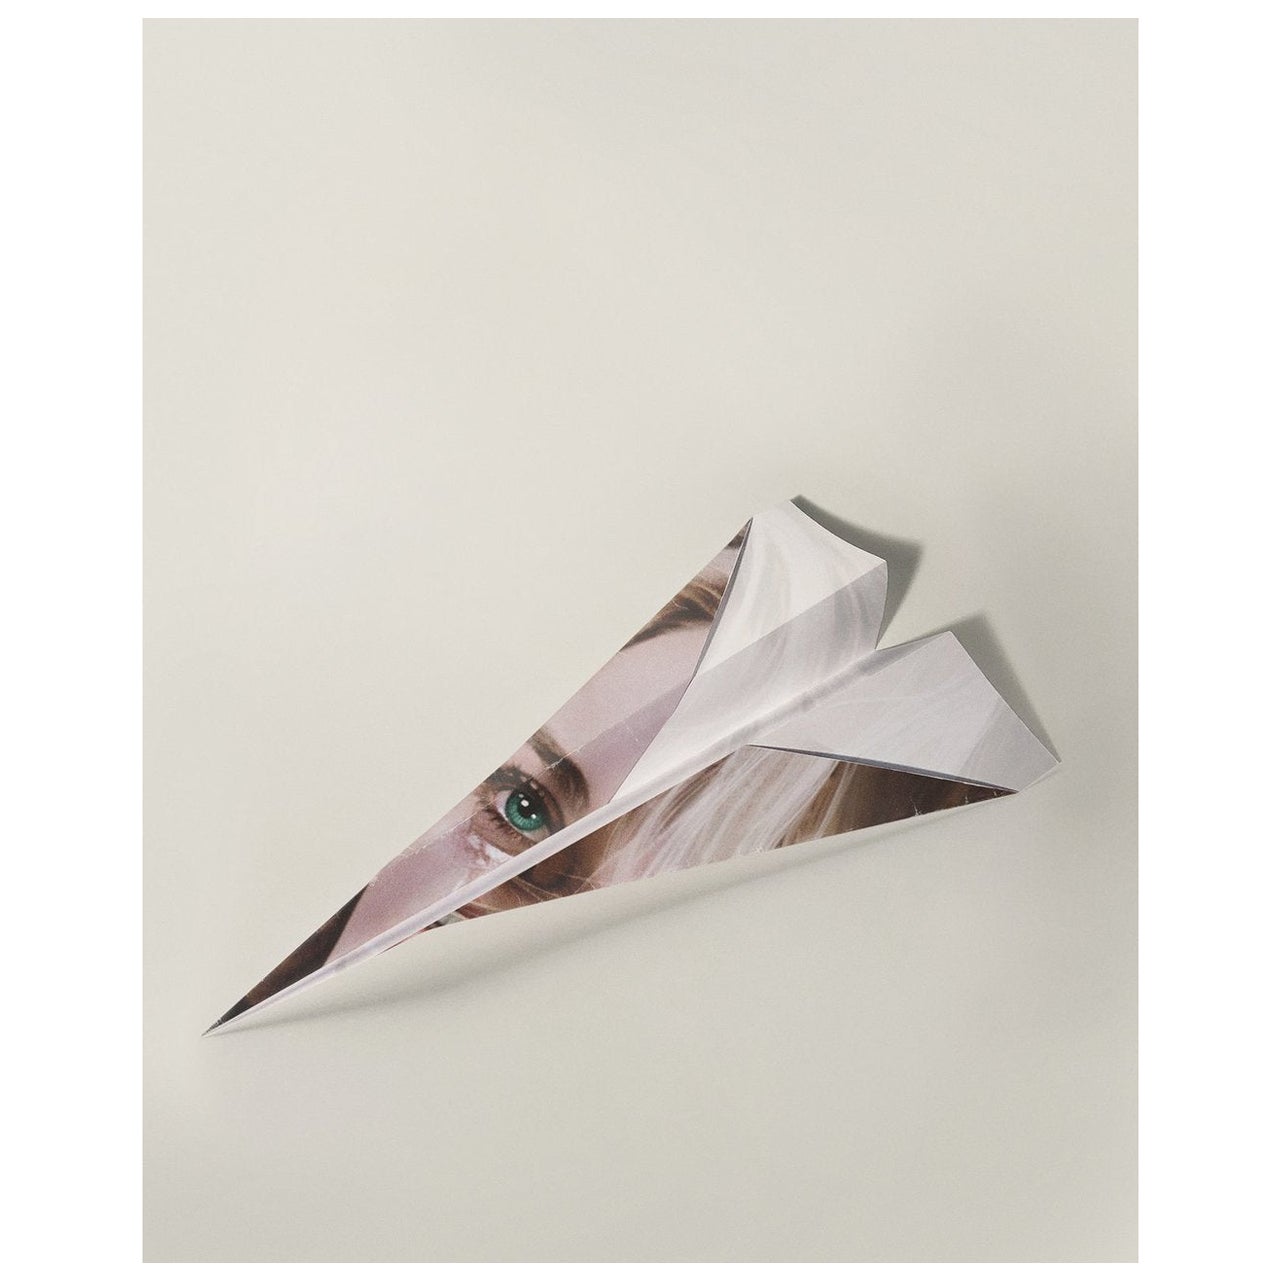 Paper Airplane 2021 U.S. Giclee Signed For Sale